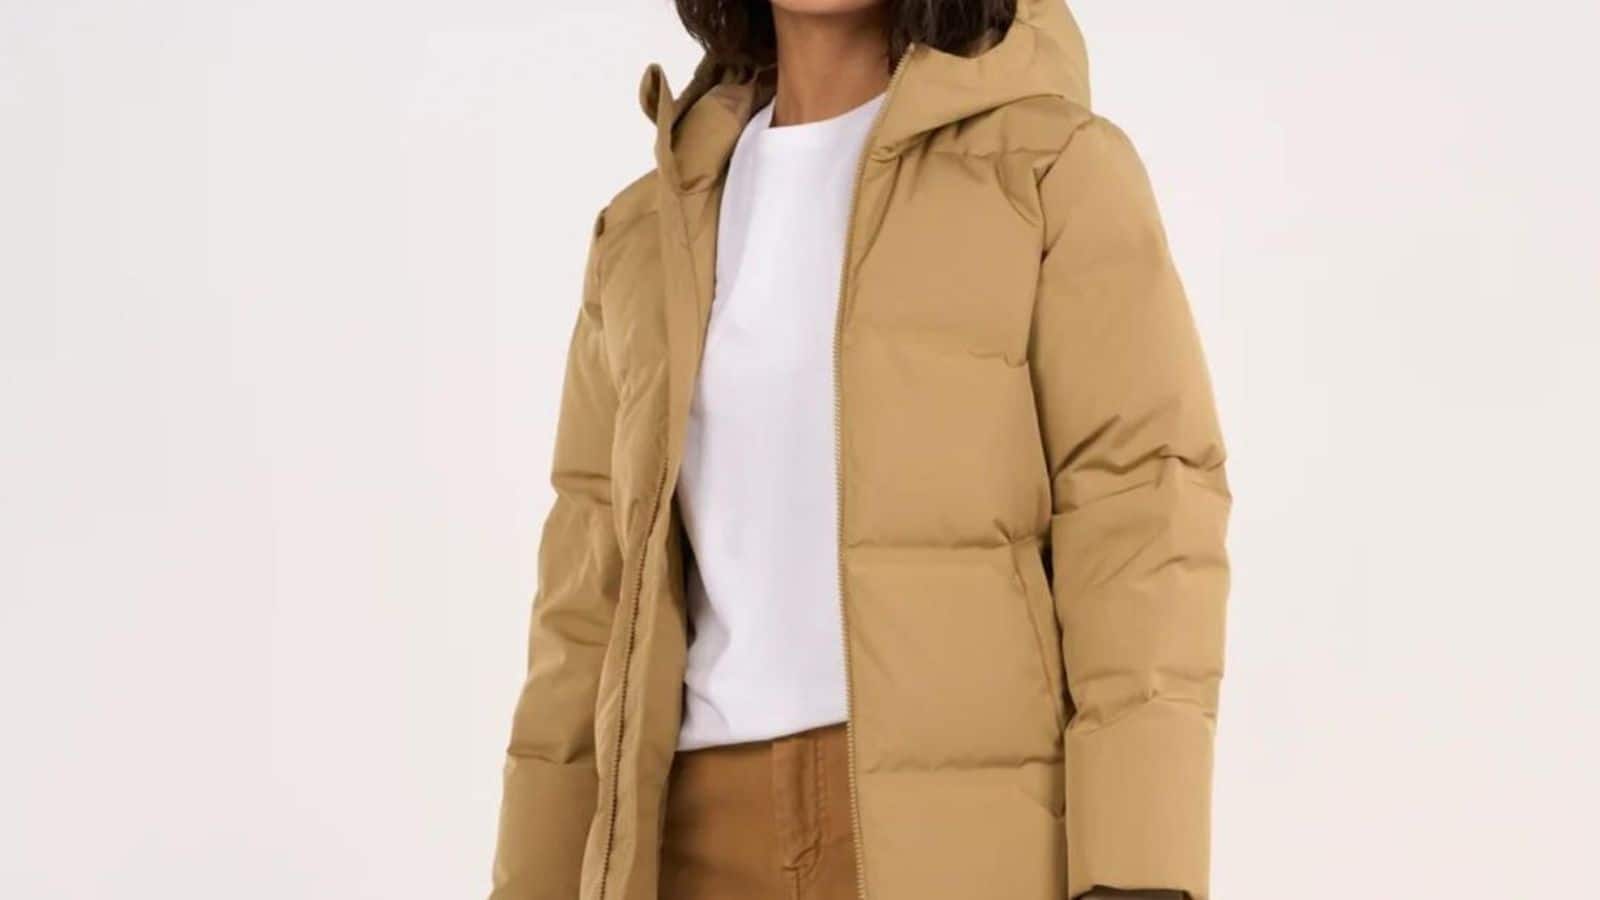 Eco outerwear options for sustainable fashion